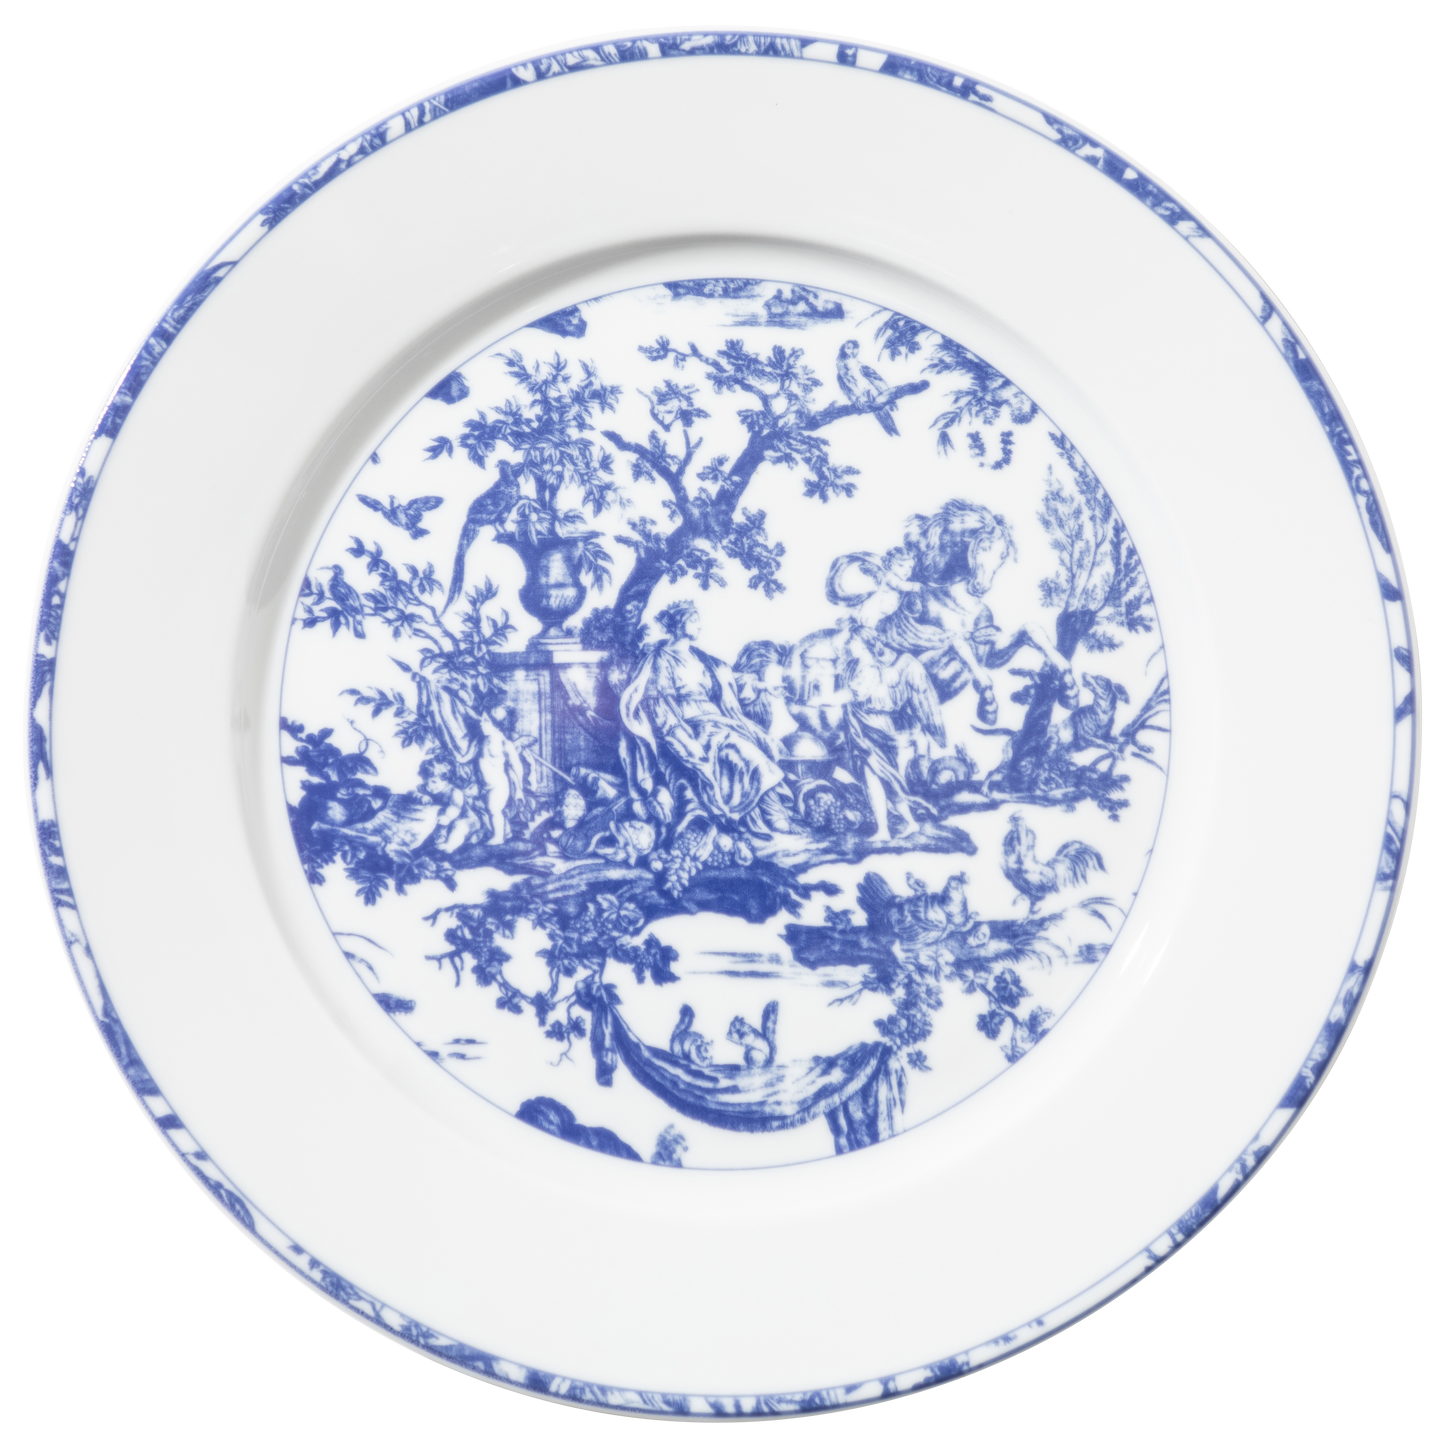 Toile de Jouy: The Four Parts of the World, Blue